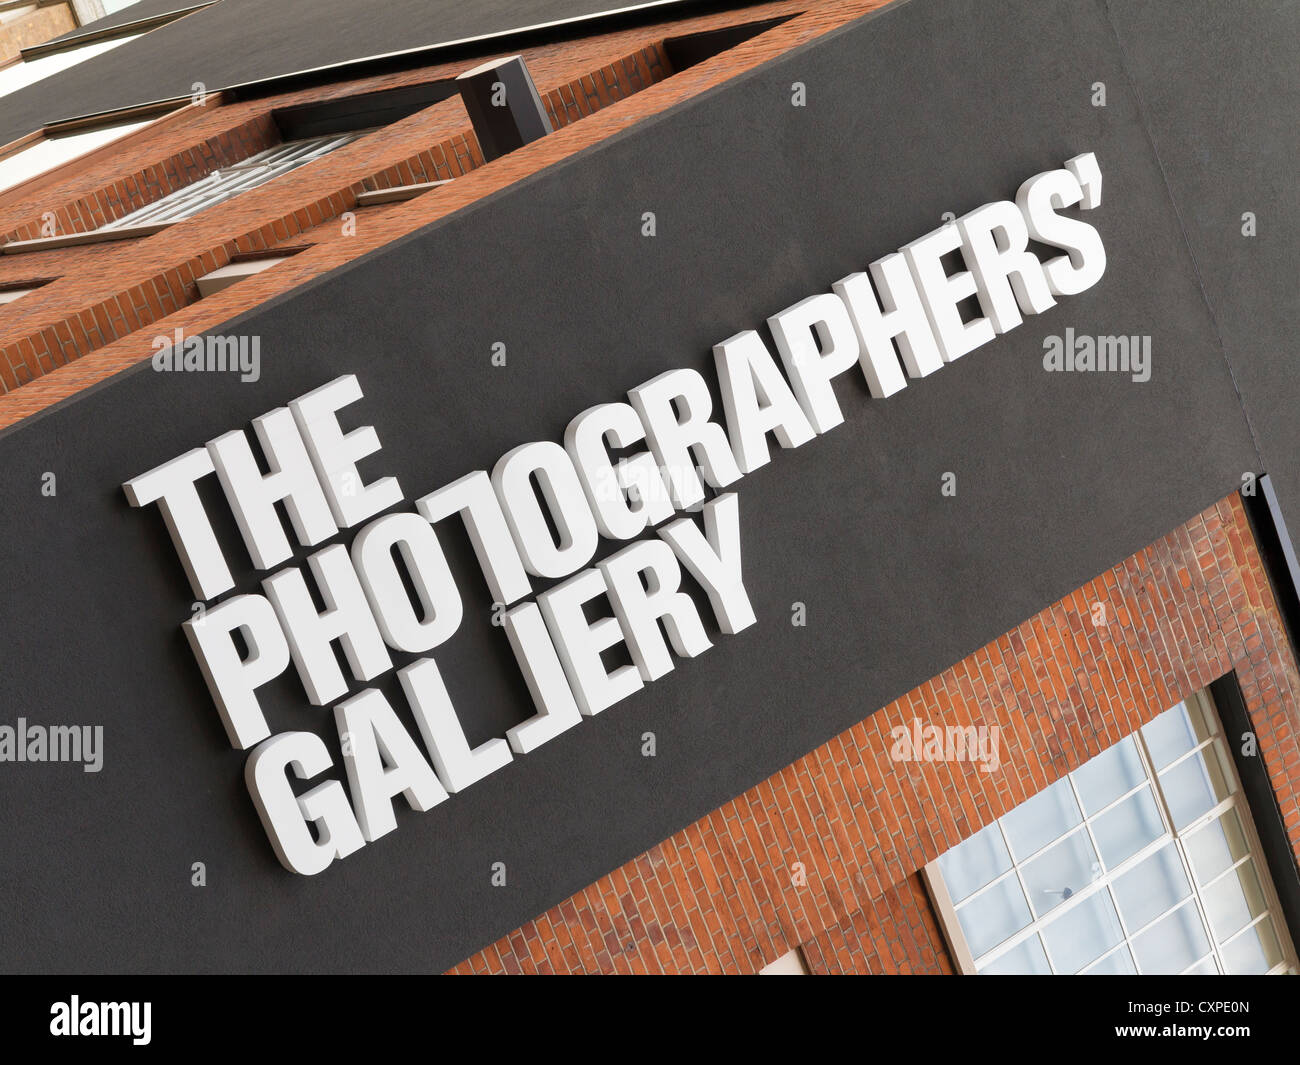 La Photographers' Gallery, Londres, Angleterre Banque D'Images